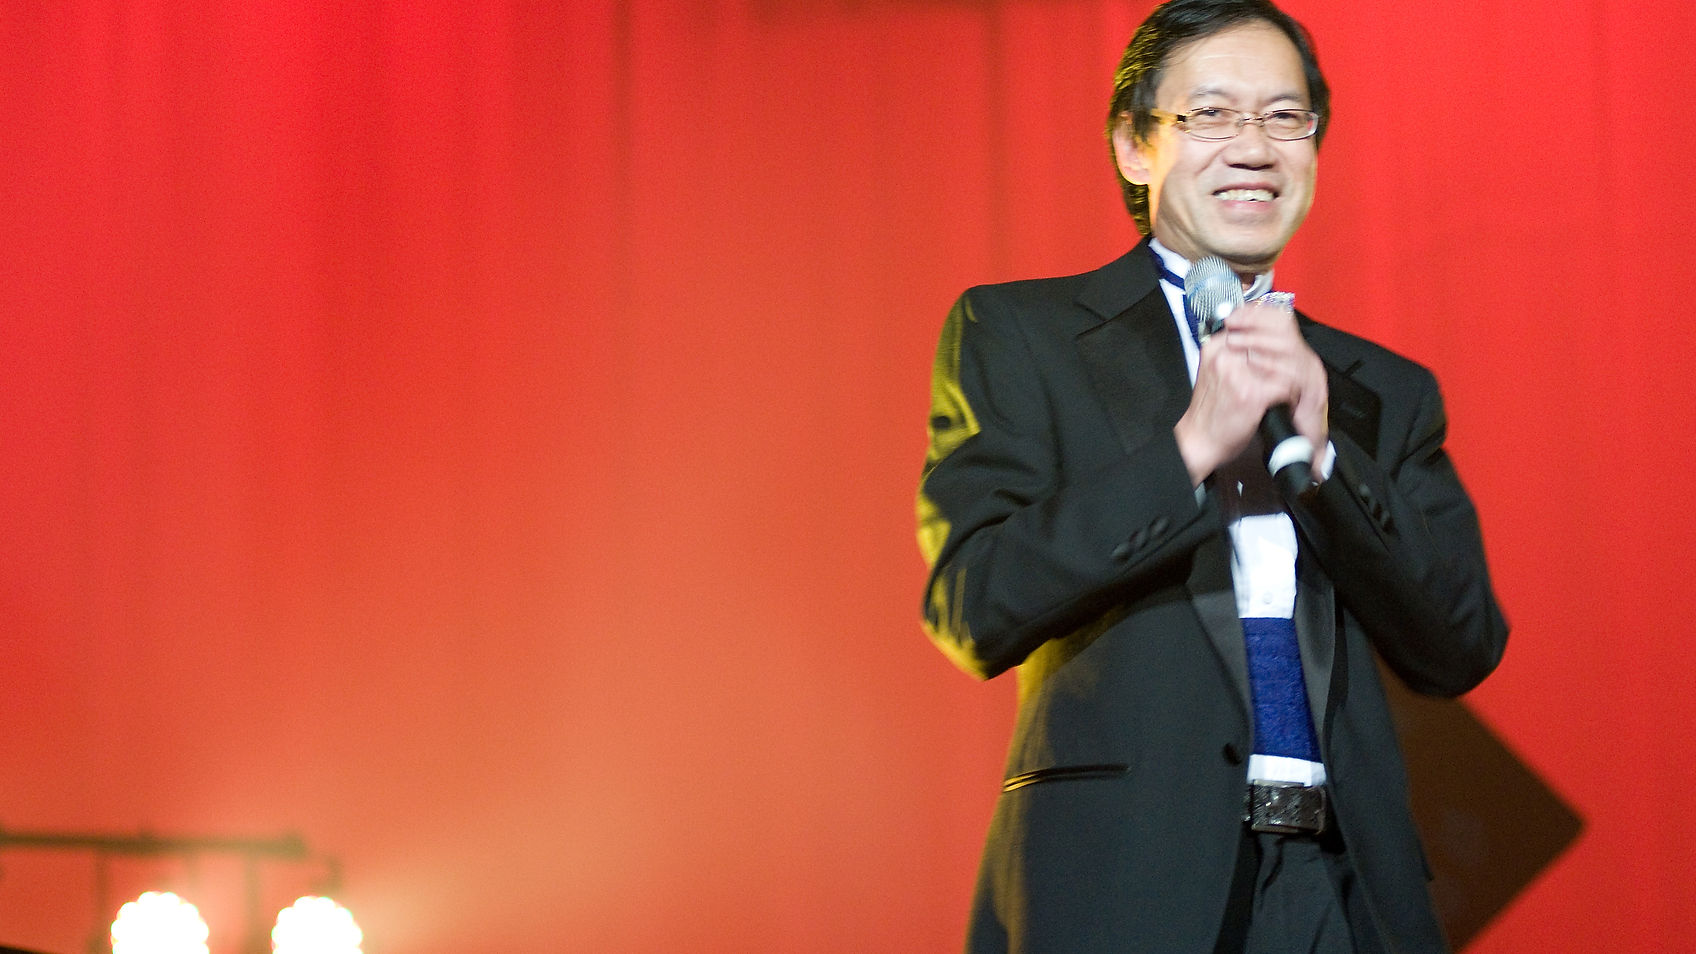 A Tribute to Allen Chang: A Concert for Love